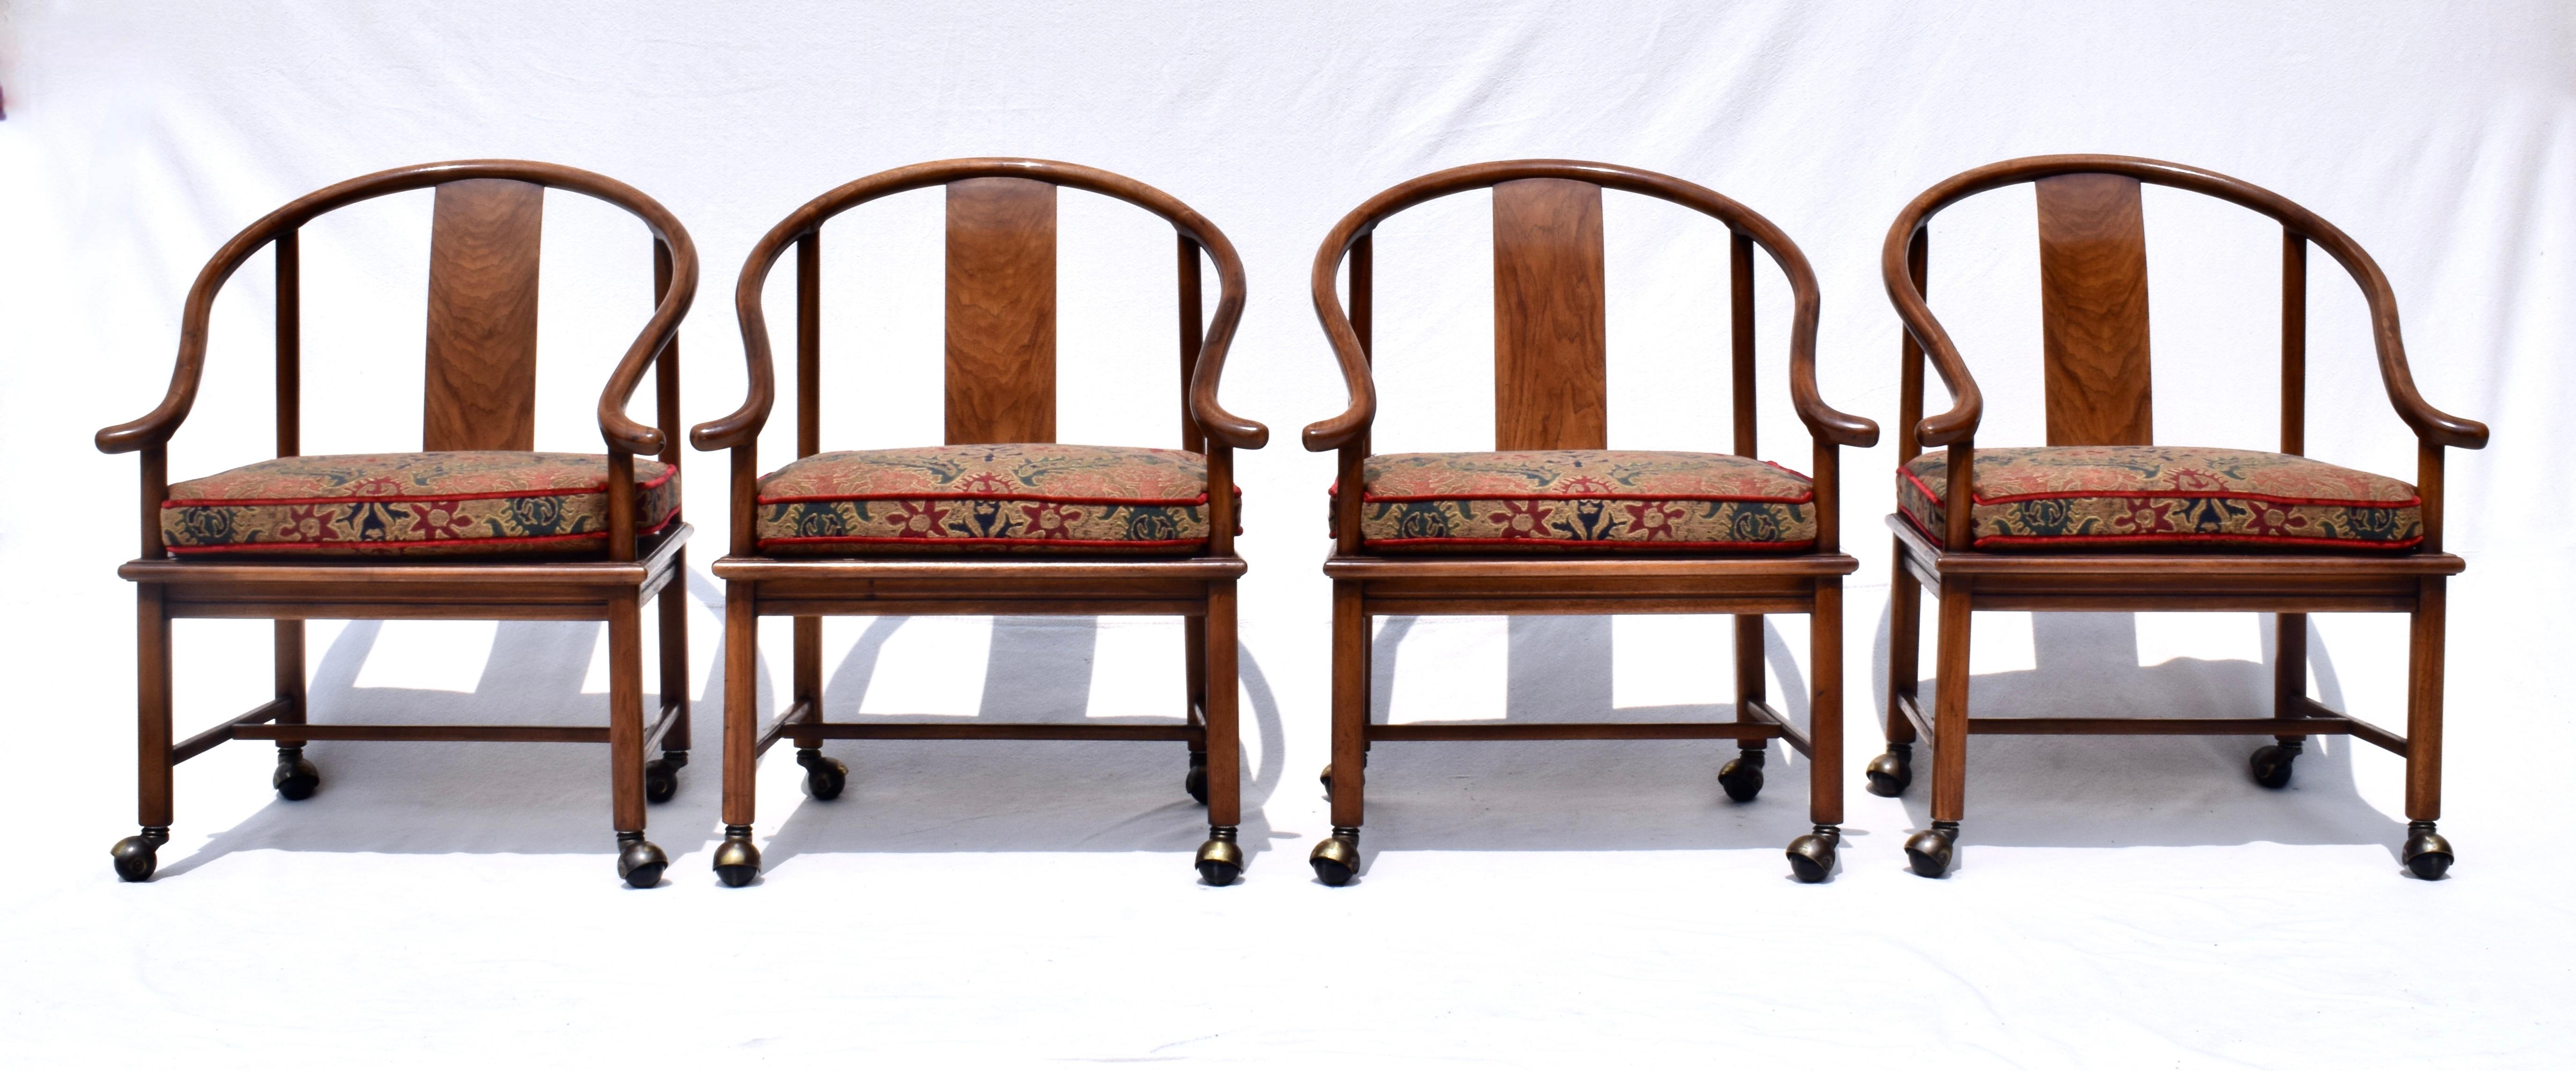 20th c. Modern Ming Horseshoe Chairs With Caned Seats Custom Cushions  For Sale 3